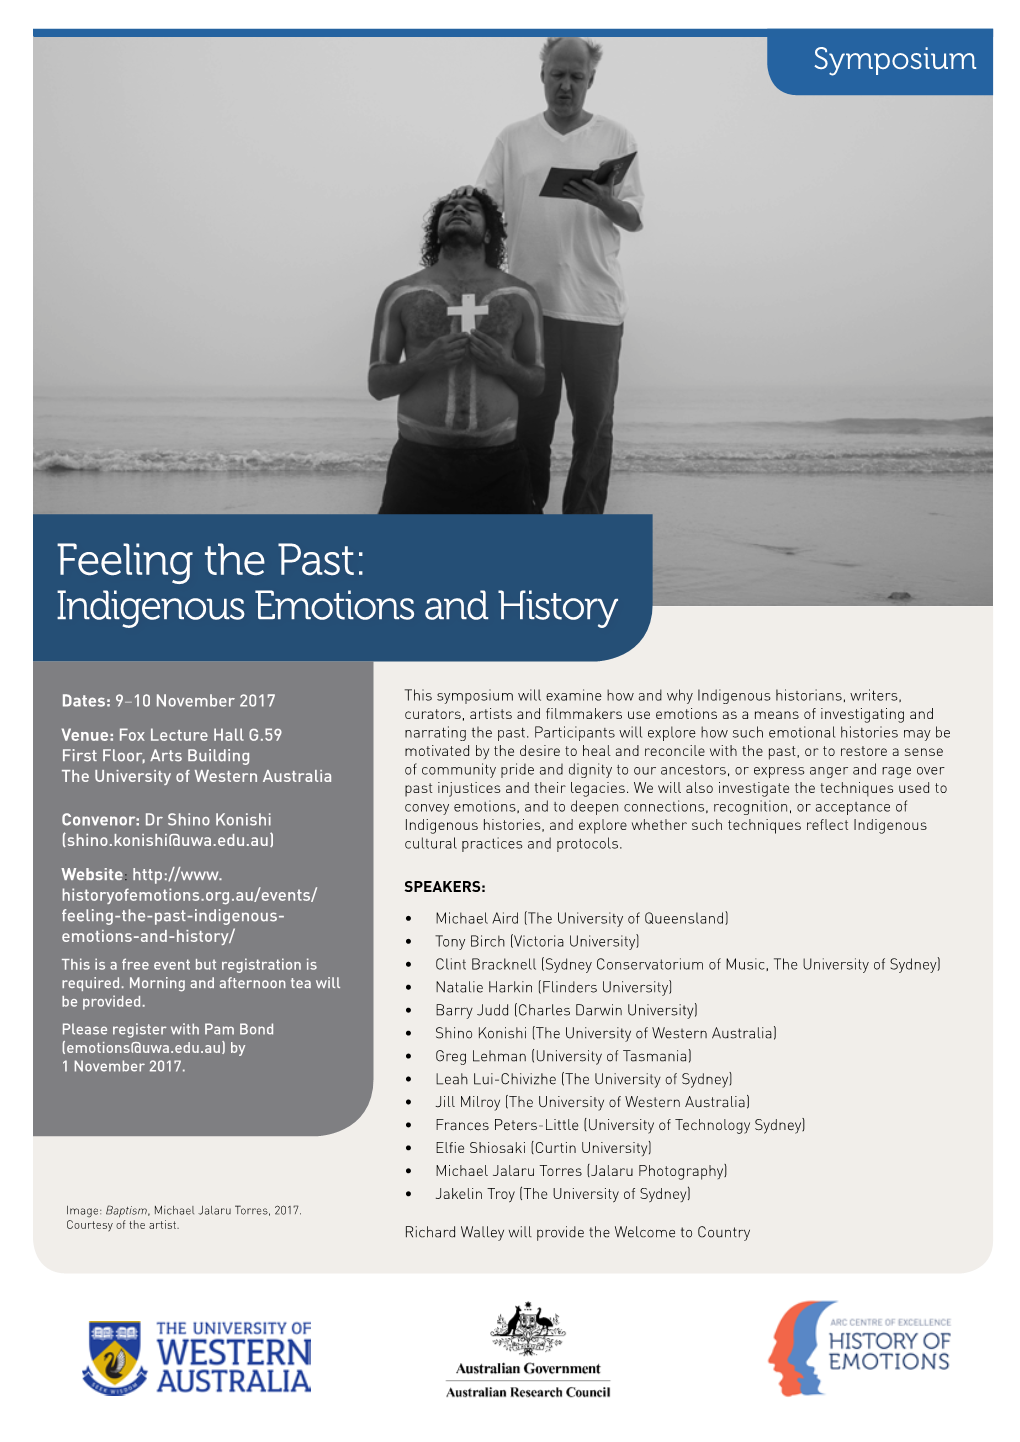 Feeling the Past: Indigenous Emotions and History